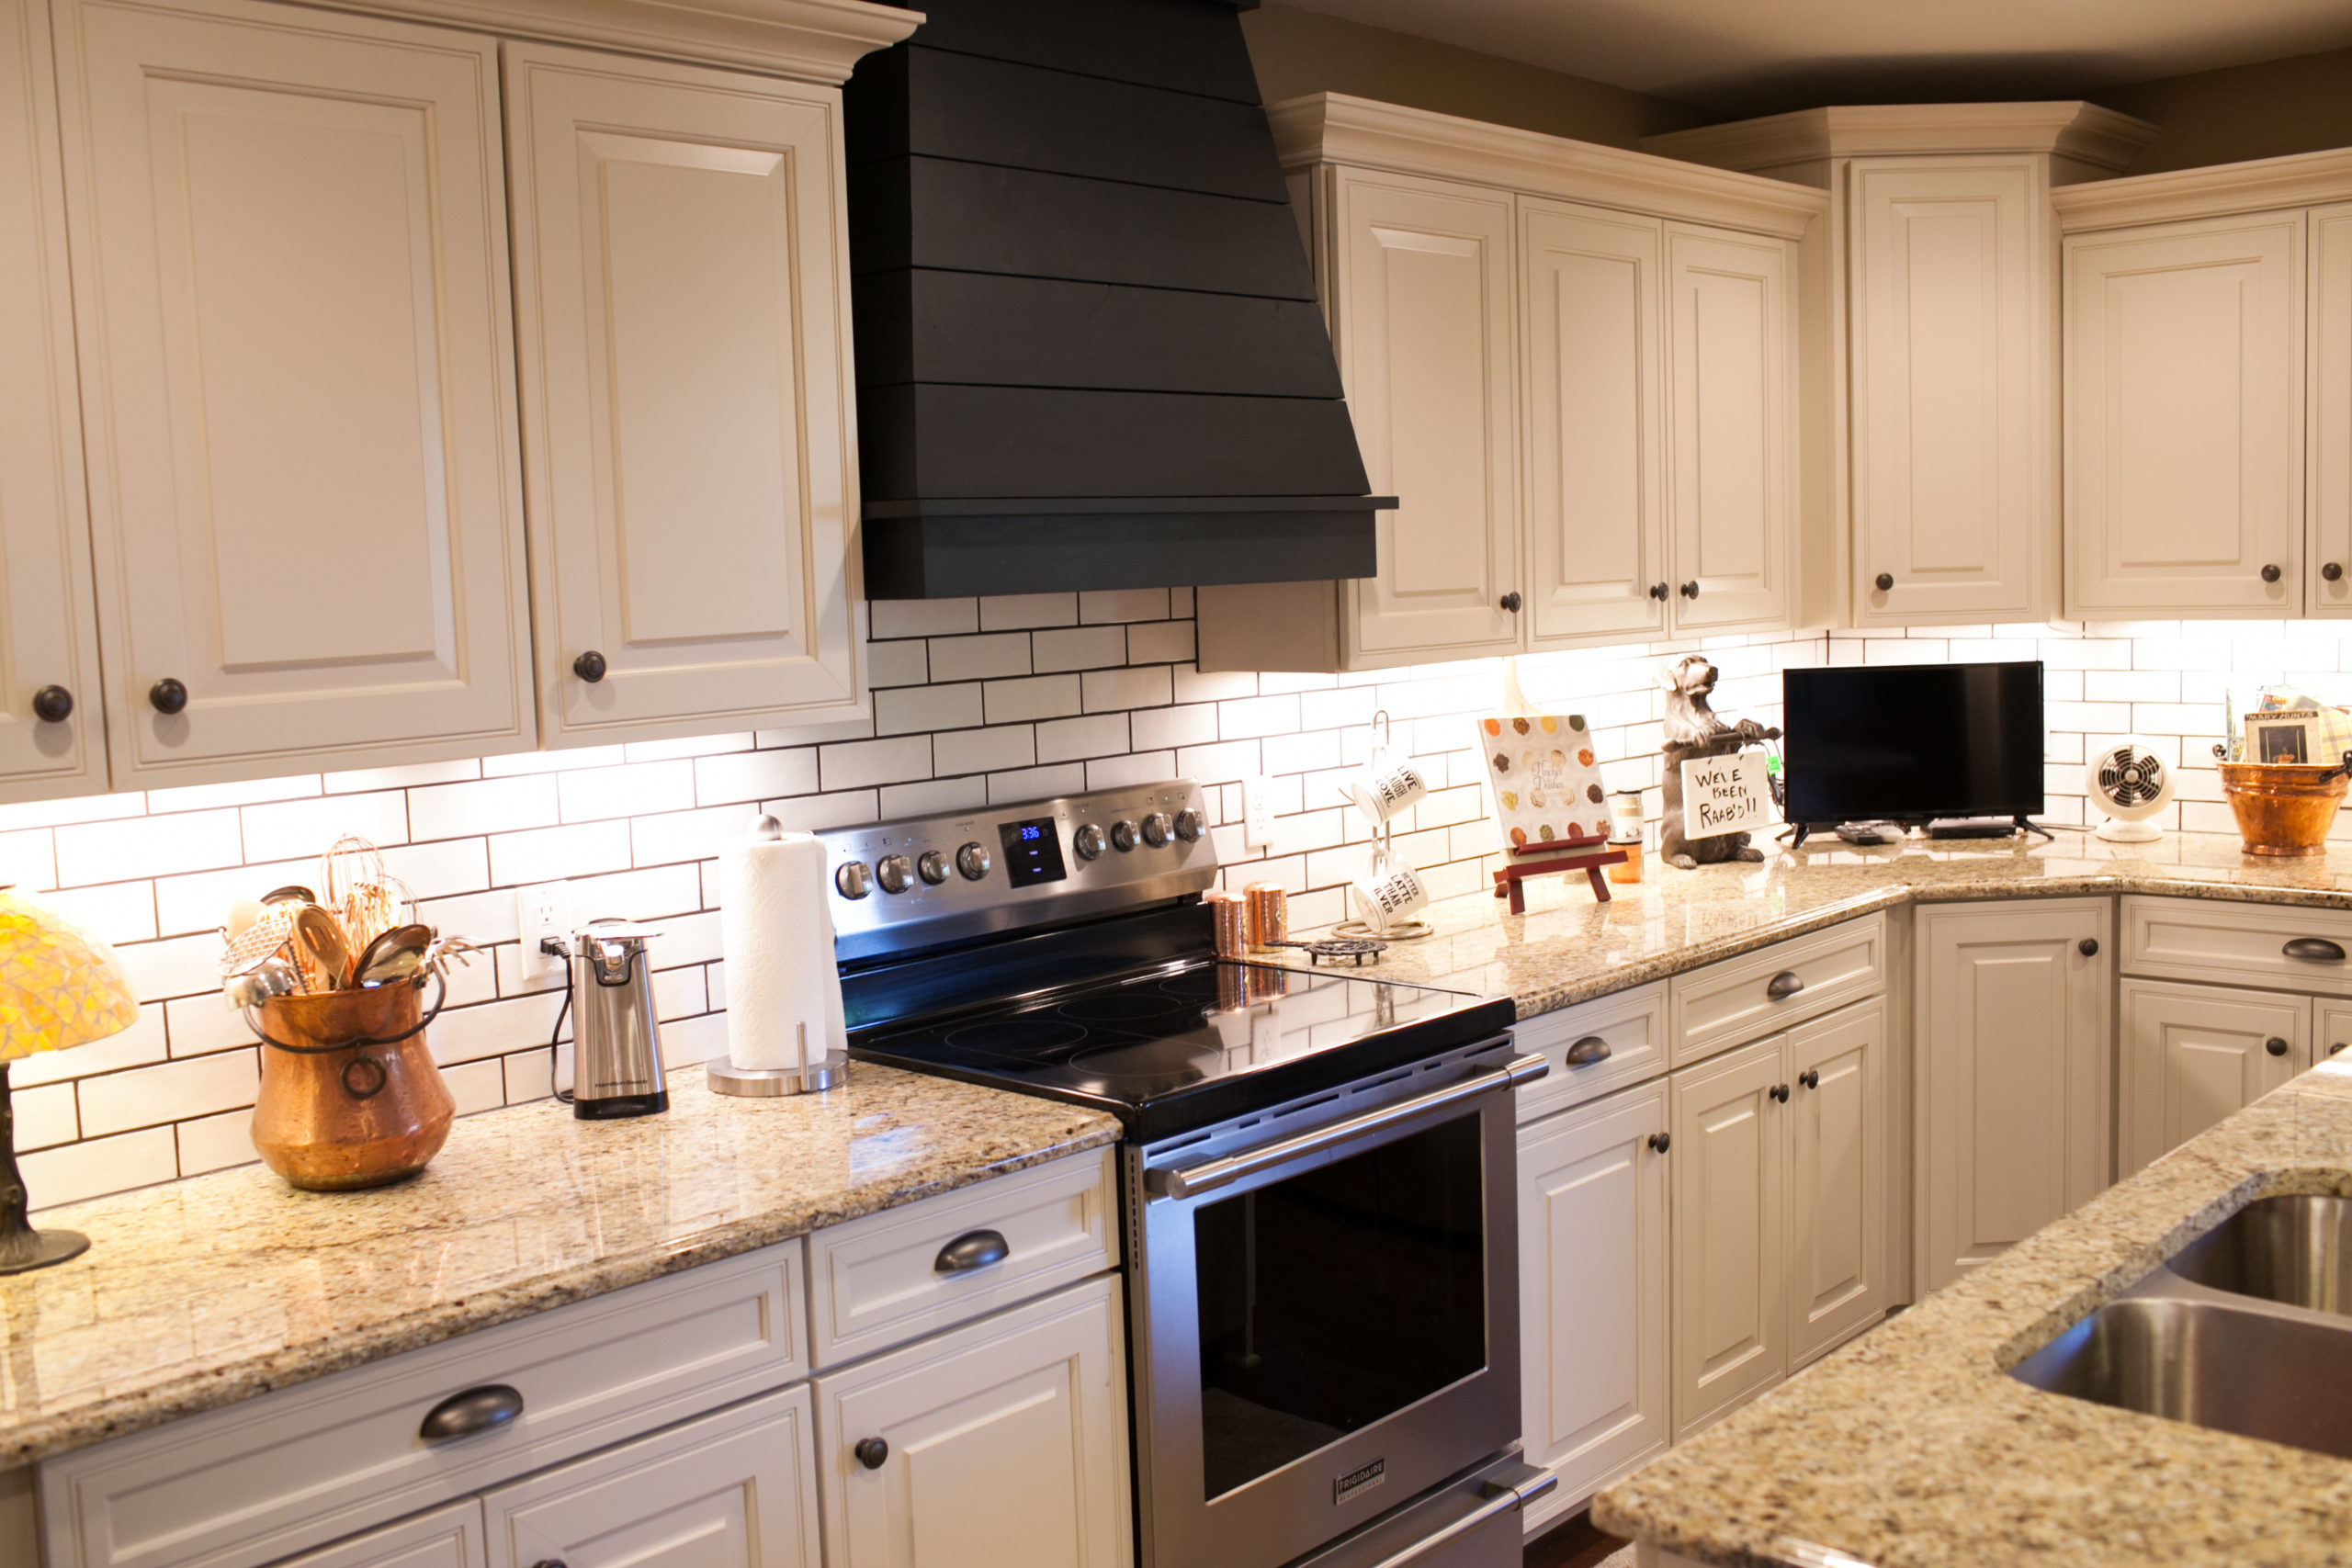 Four Tips for Selecting Finishes for Your Kitchen Remodel